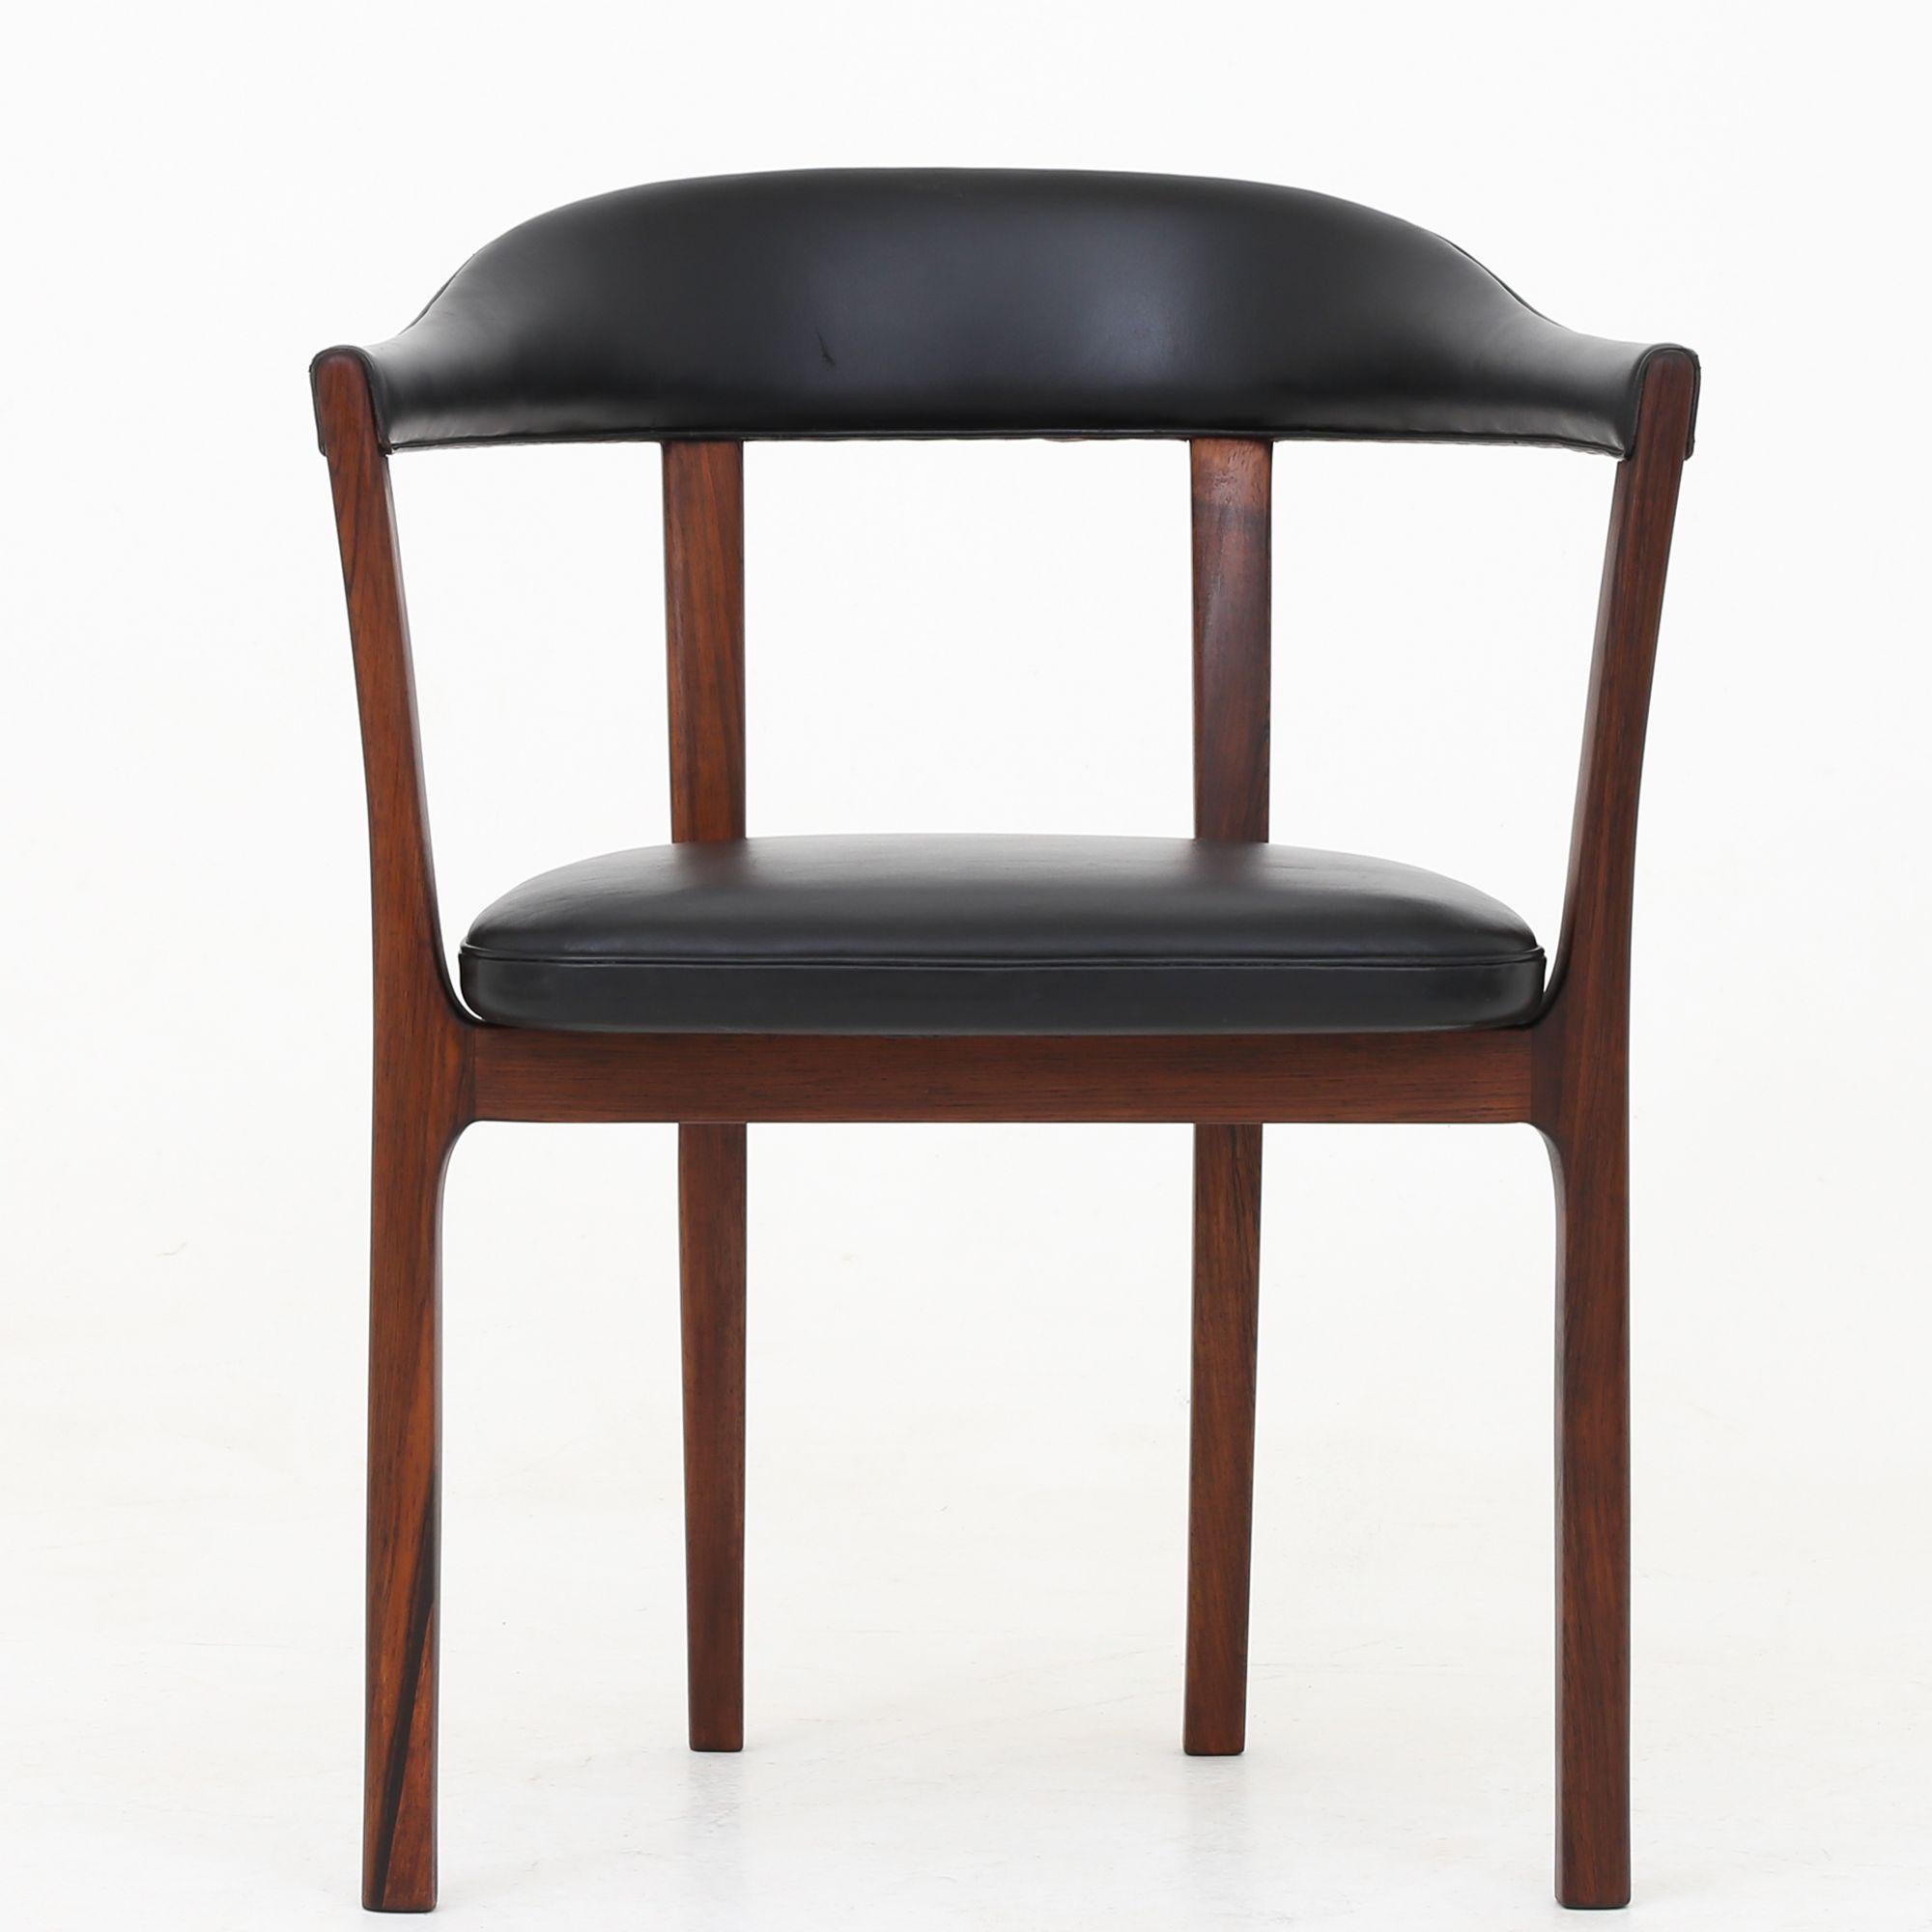 Two rare armchairs in rosewood and black leather. Model J2833. Designed in 1958. Ole Wanscher / A. J Iversen.